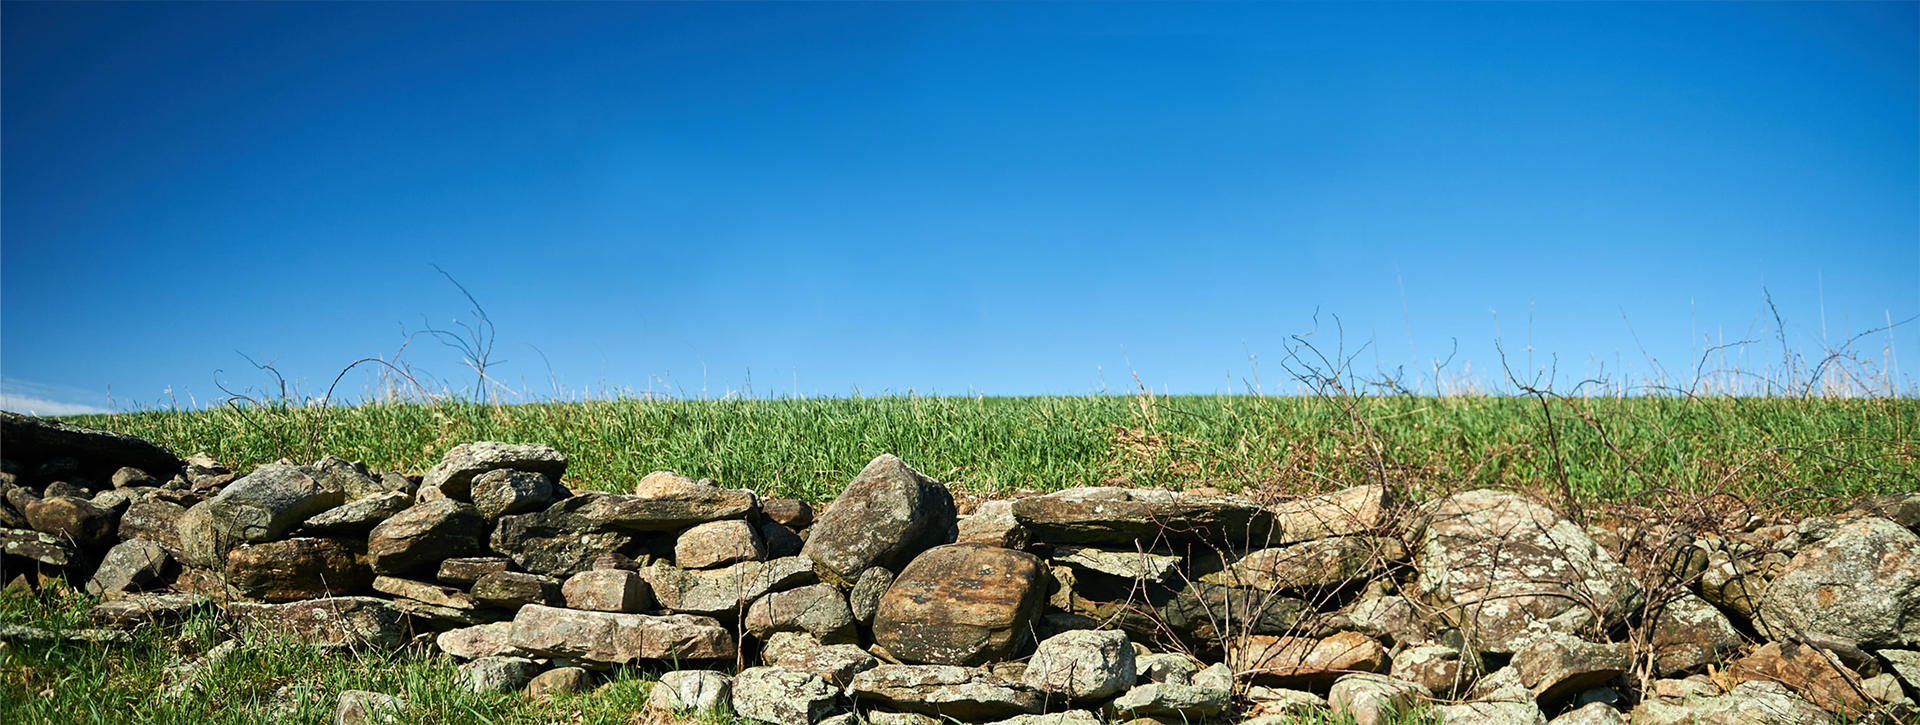 A stone wall in a wide-open field on a sunny day.